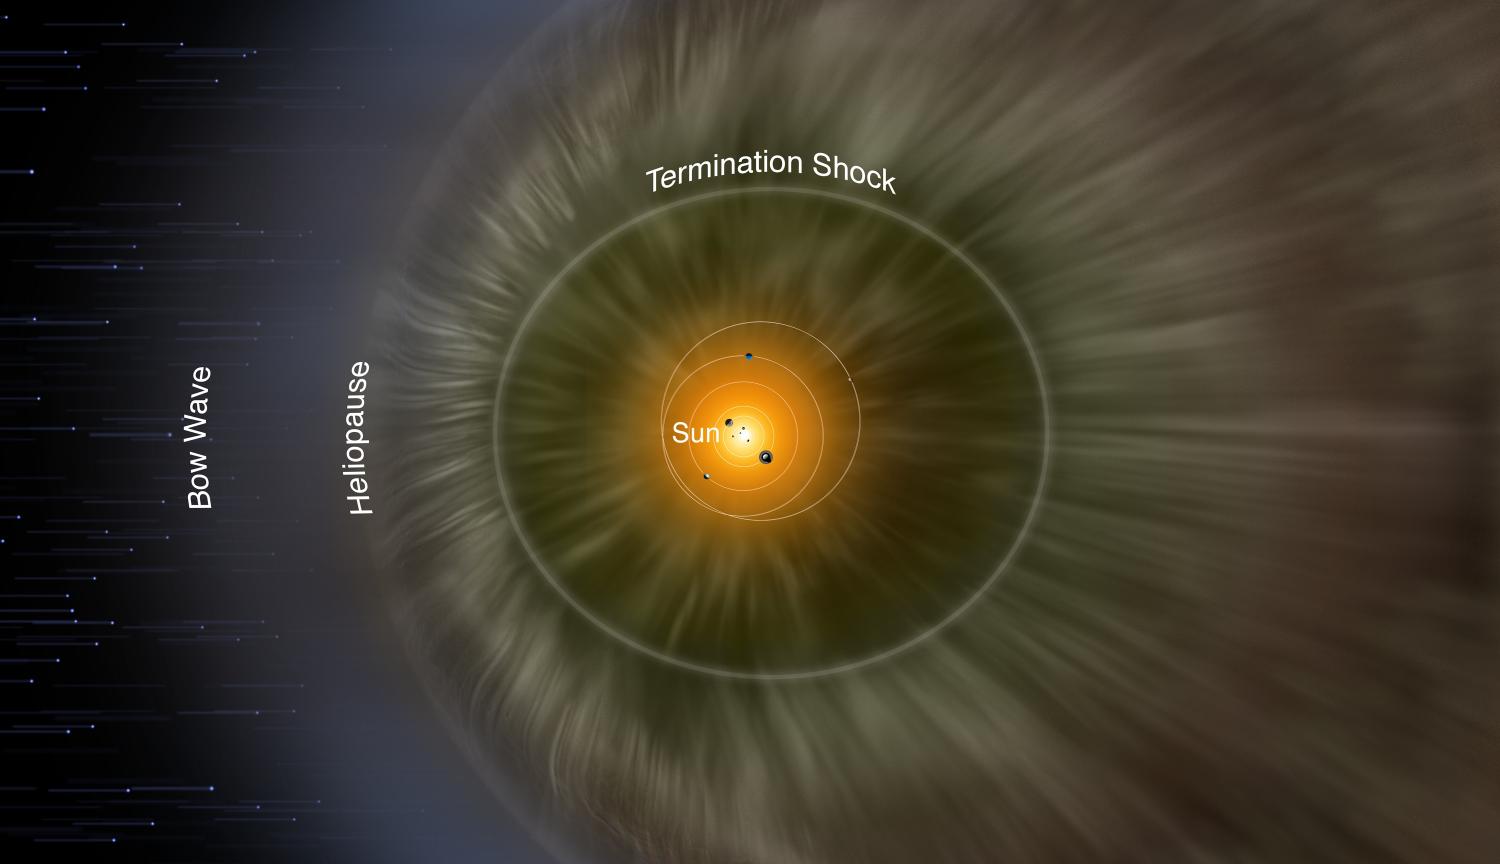 Illustration of solar system heliosphere. The Sun is a labeled bright yellow dot, with the planetary orbits as white circles tight around it. A wider circle is labeled Termination Shock. On the left, an arc separates the gray streaks moving out from the Sun from the dark blue of space. This arc is labeled Heliopause. Further out, a slightly lighter diffuse arc is labeled Bow Wave.